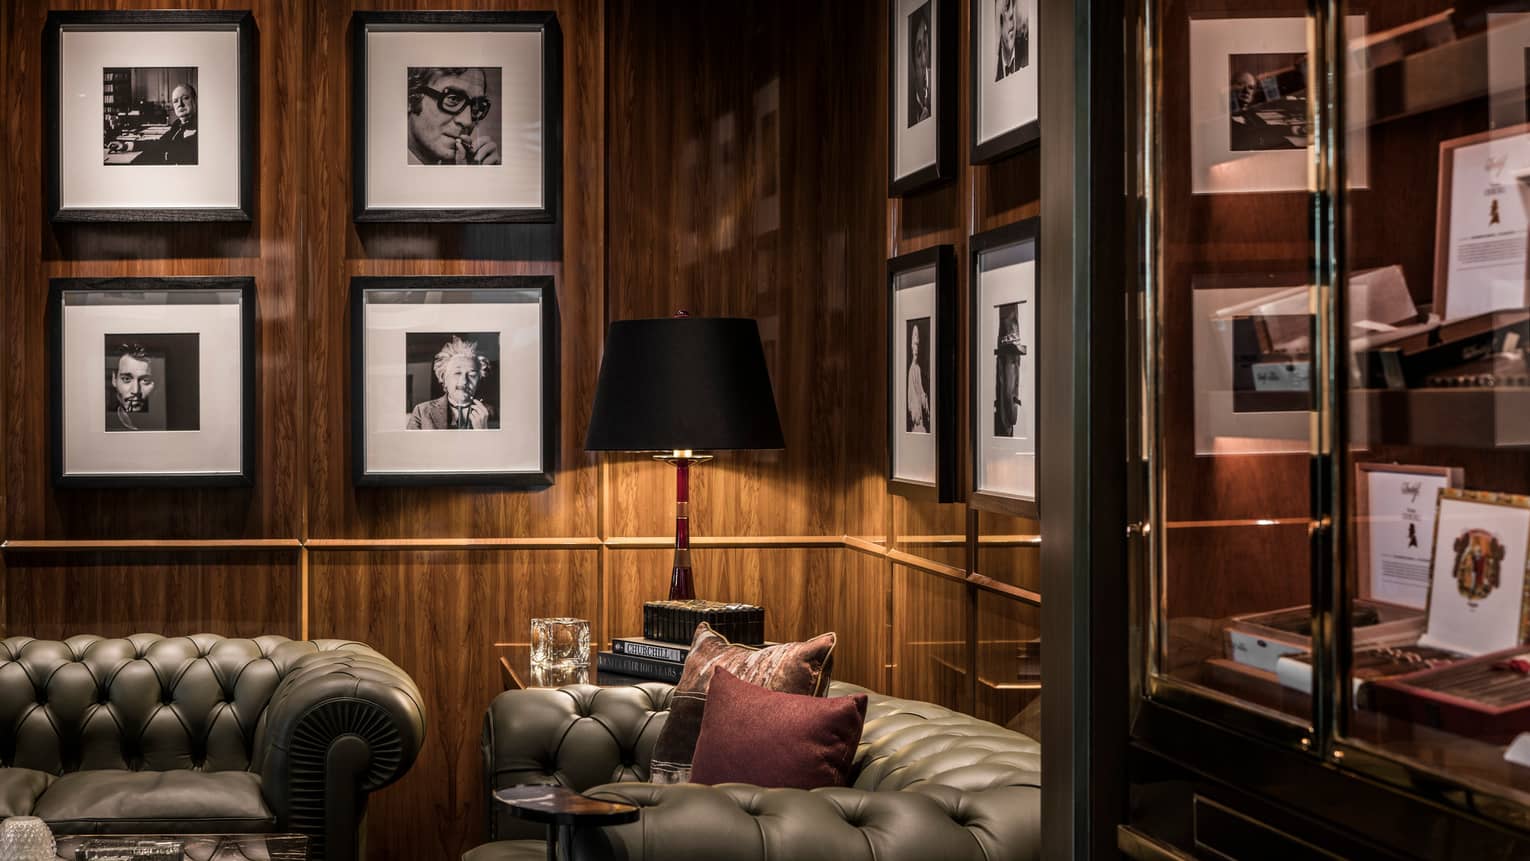 Churchill Club lounge two leather sofas against dark wood wall, framed black-and-white photos on walls